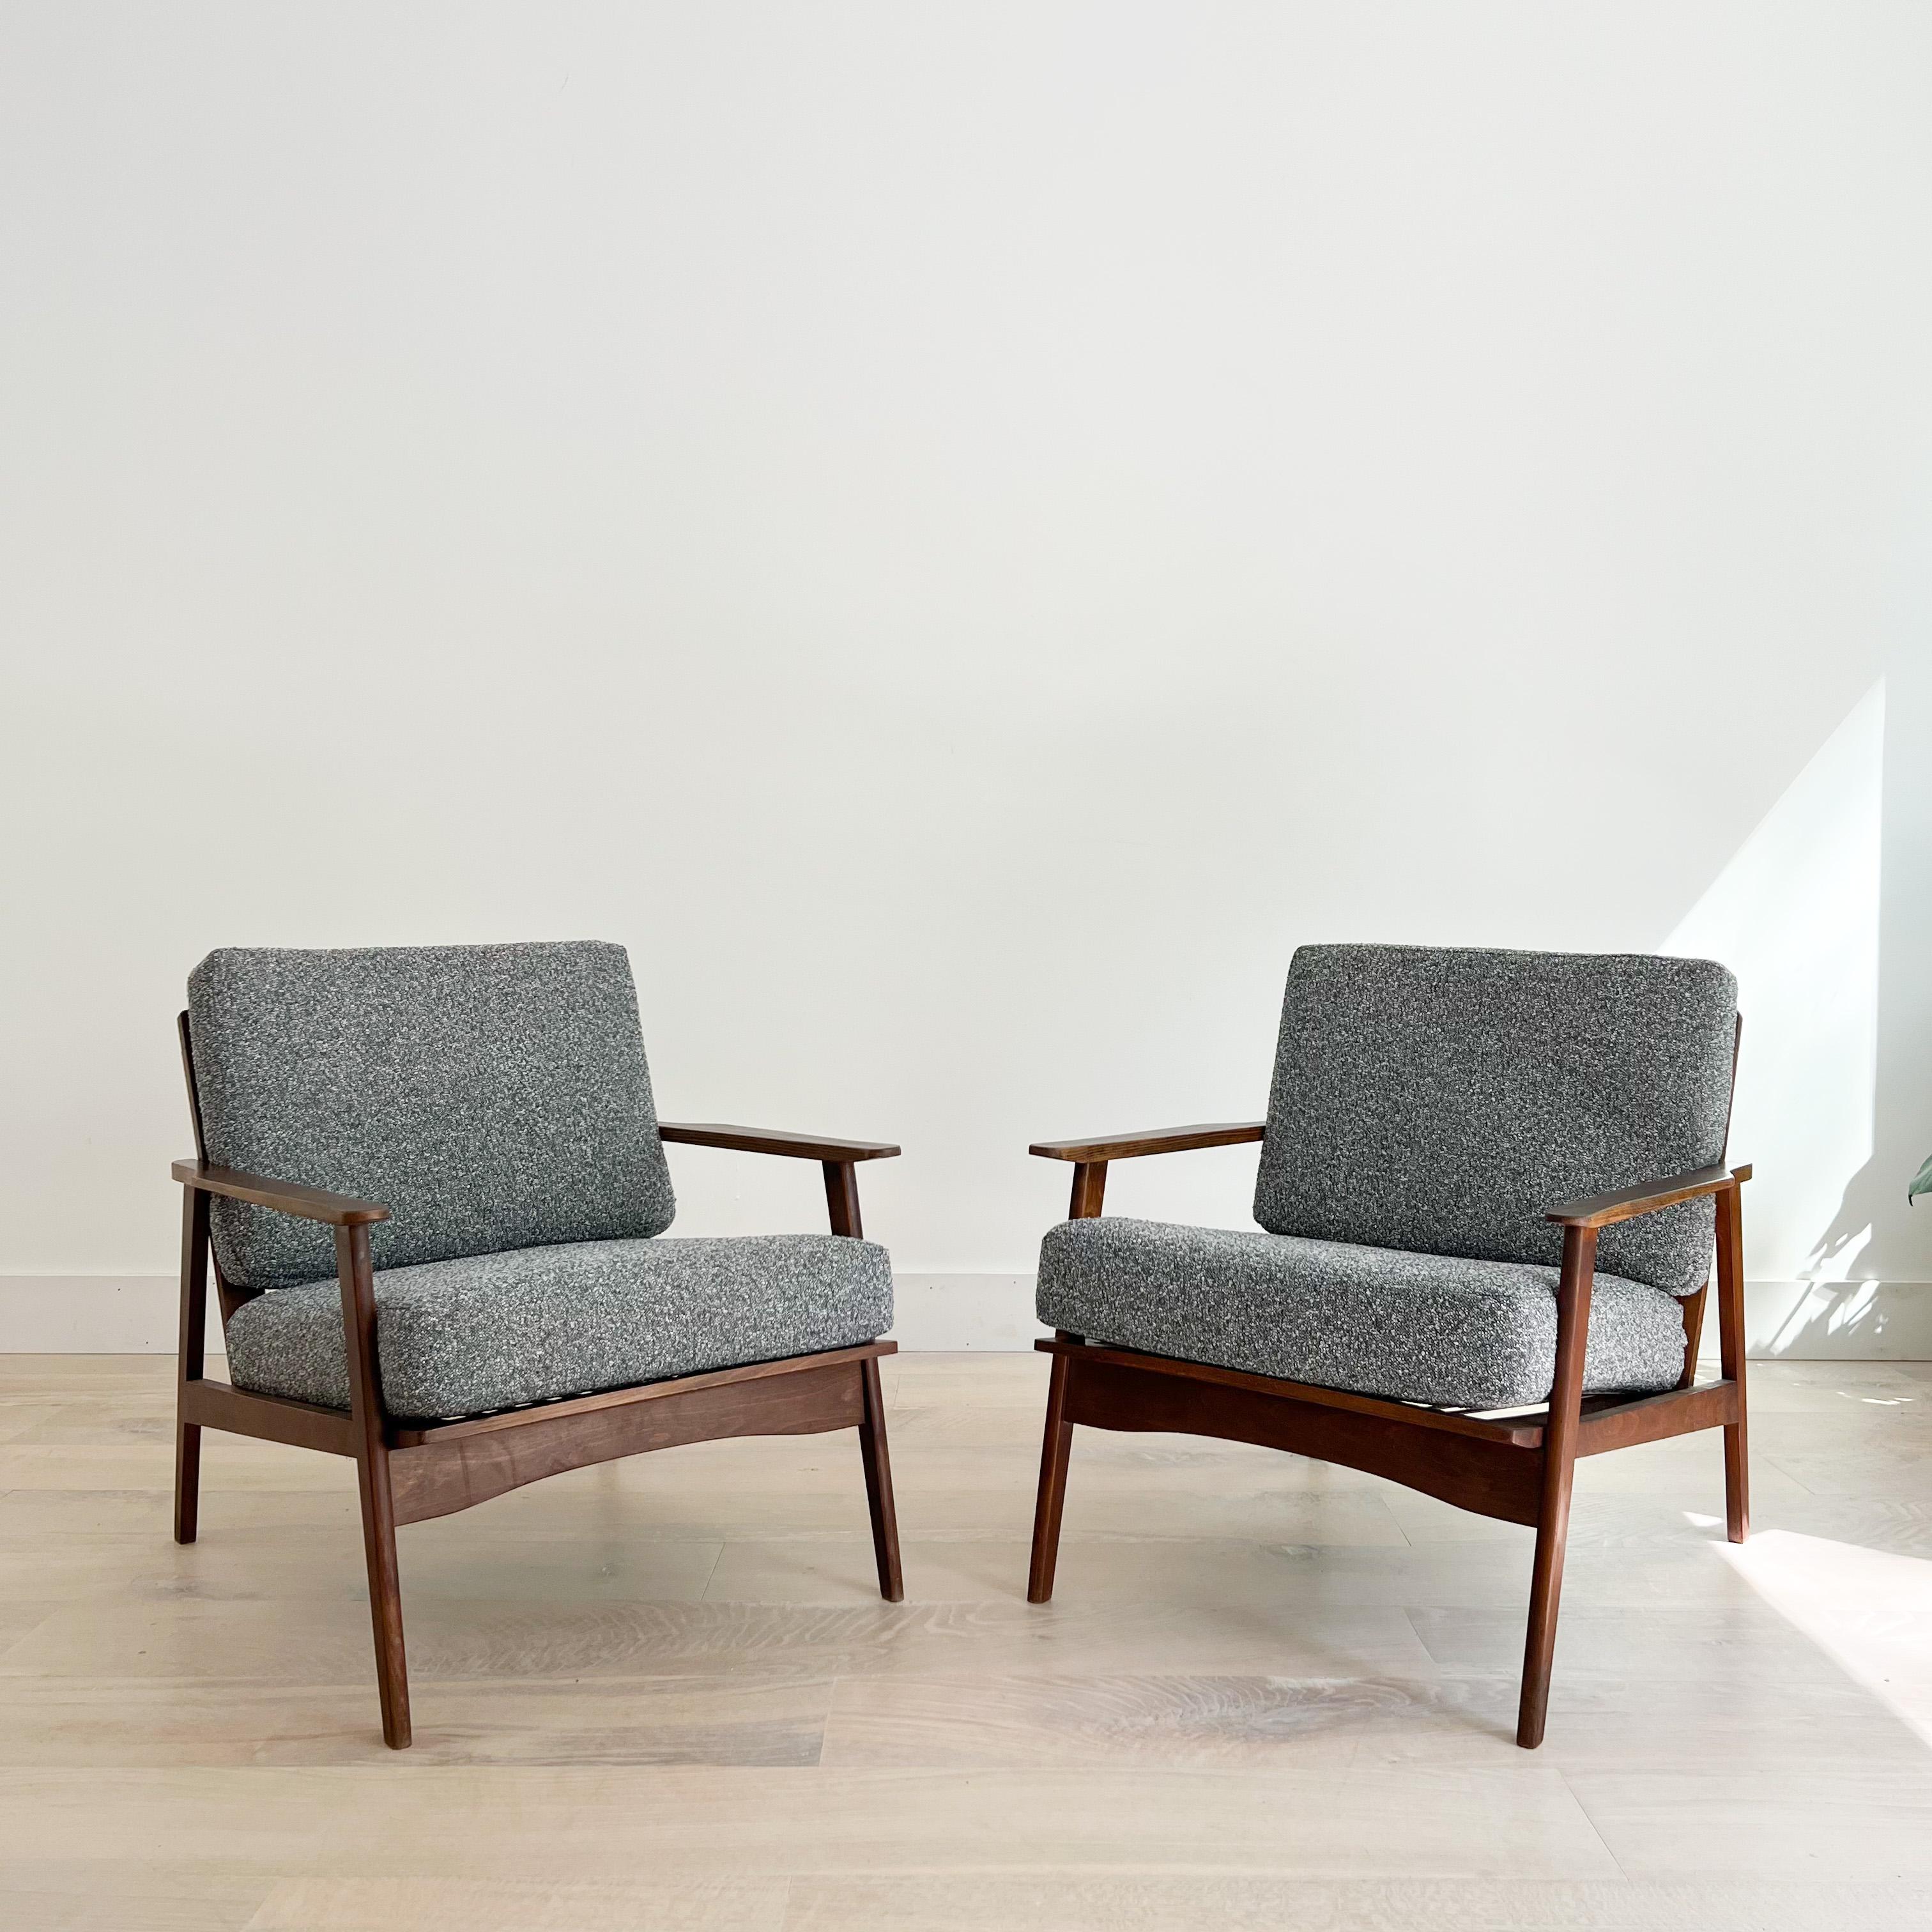 Pair of Mid-Century Modern lounge chairs. New foam and grey tweed upholstery.